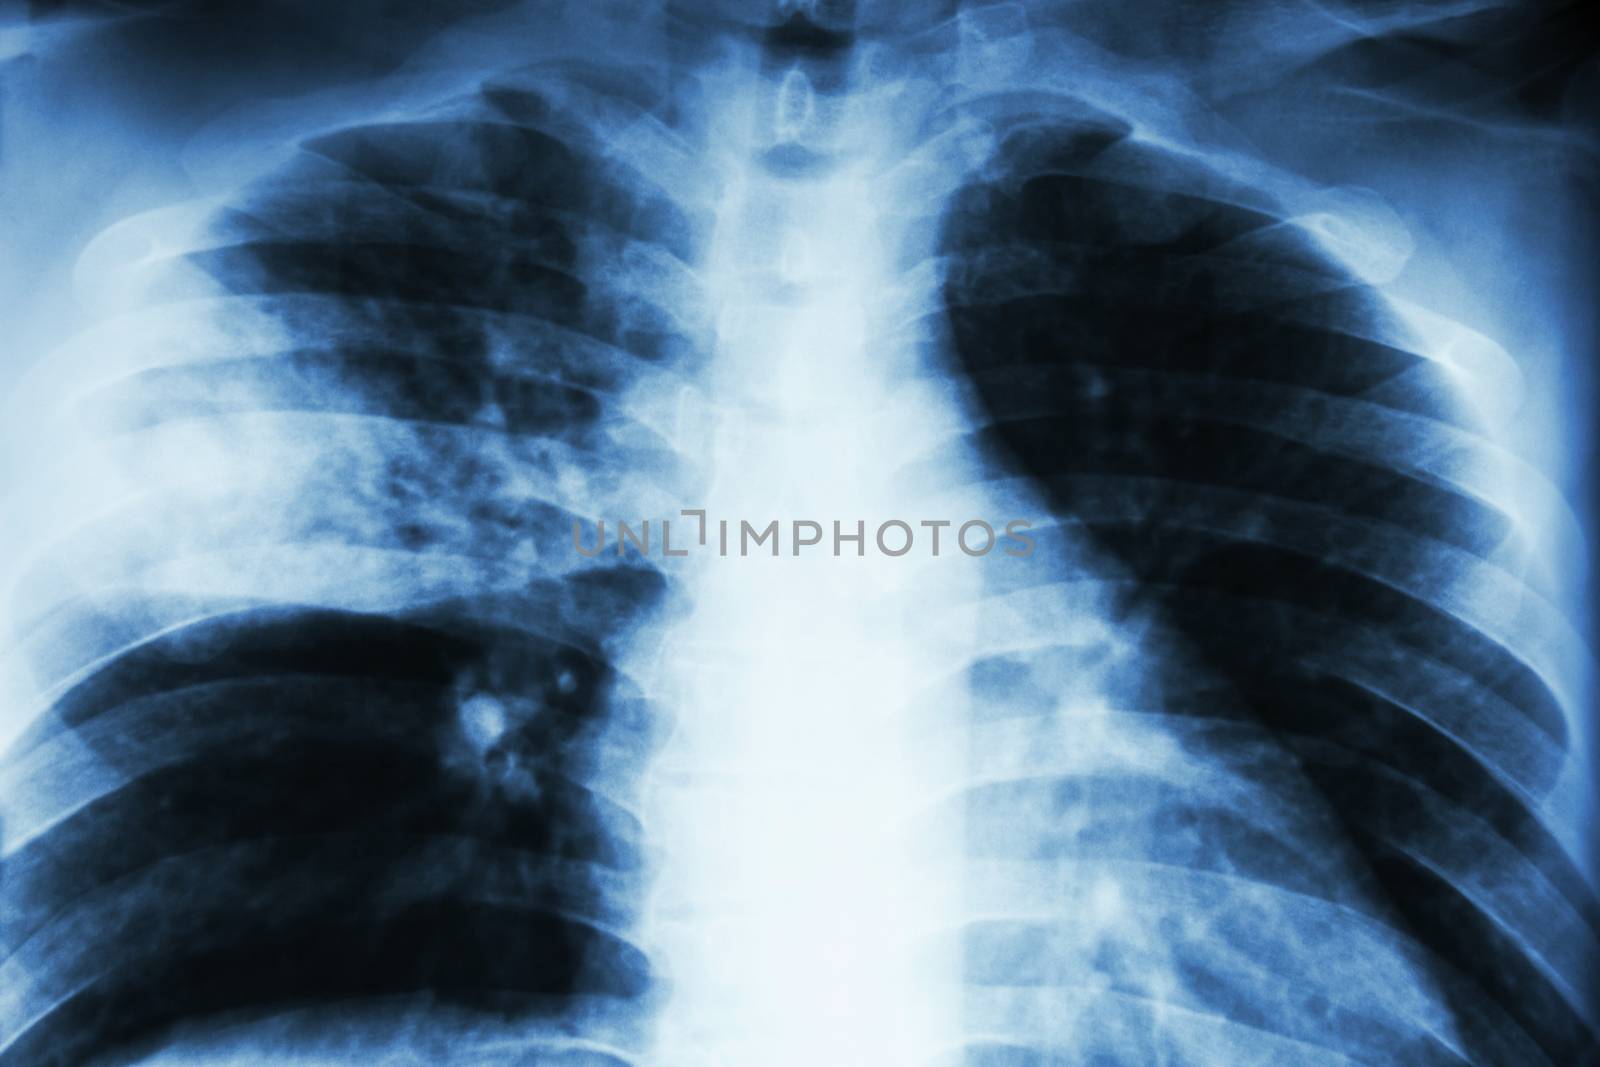 Lobar pneumonia . film chest x-ray show alveolar infiltration at right middle lobe due to tuberculosis infection . by stockdevil